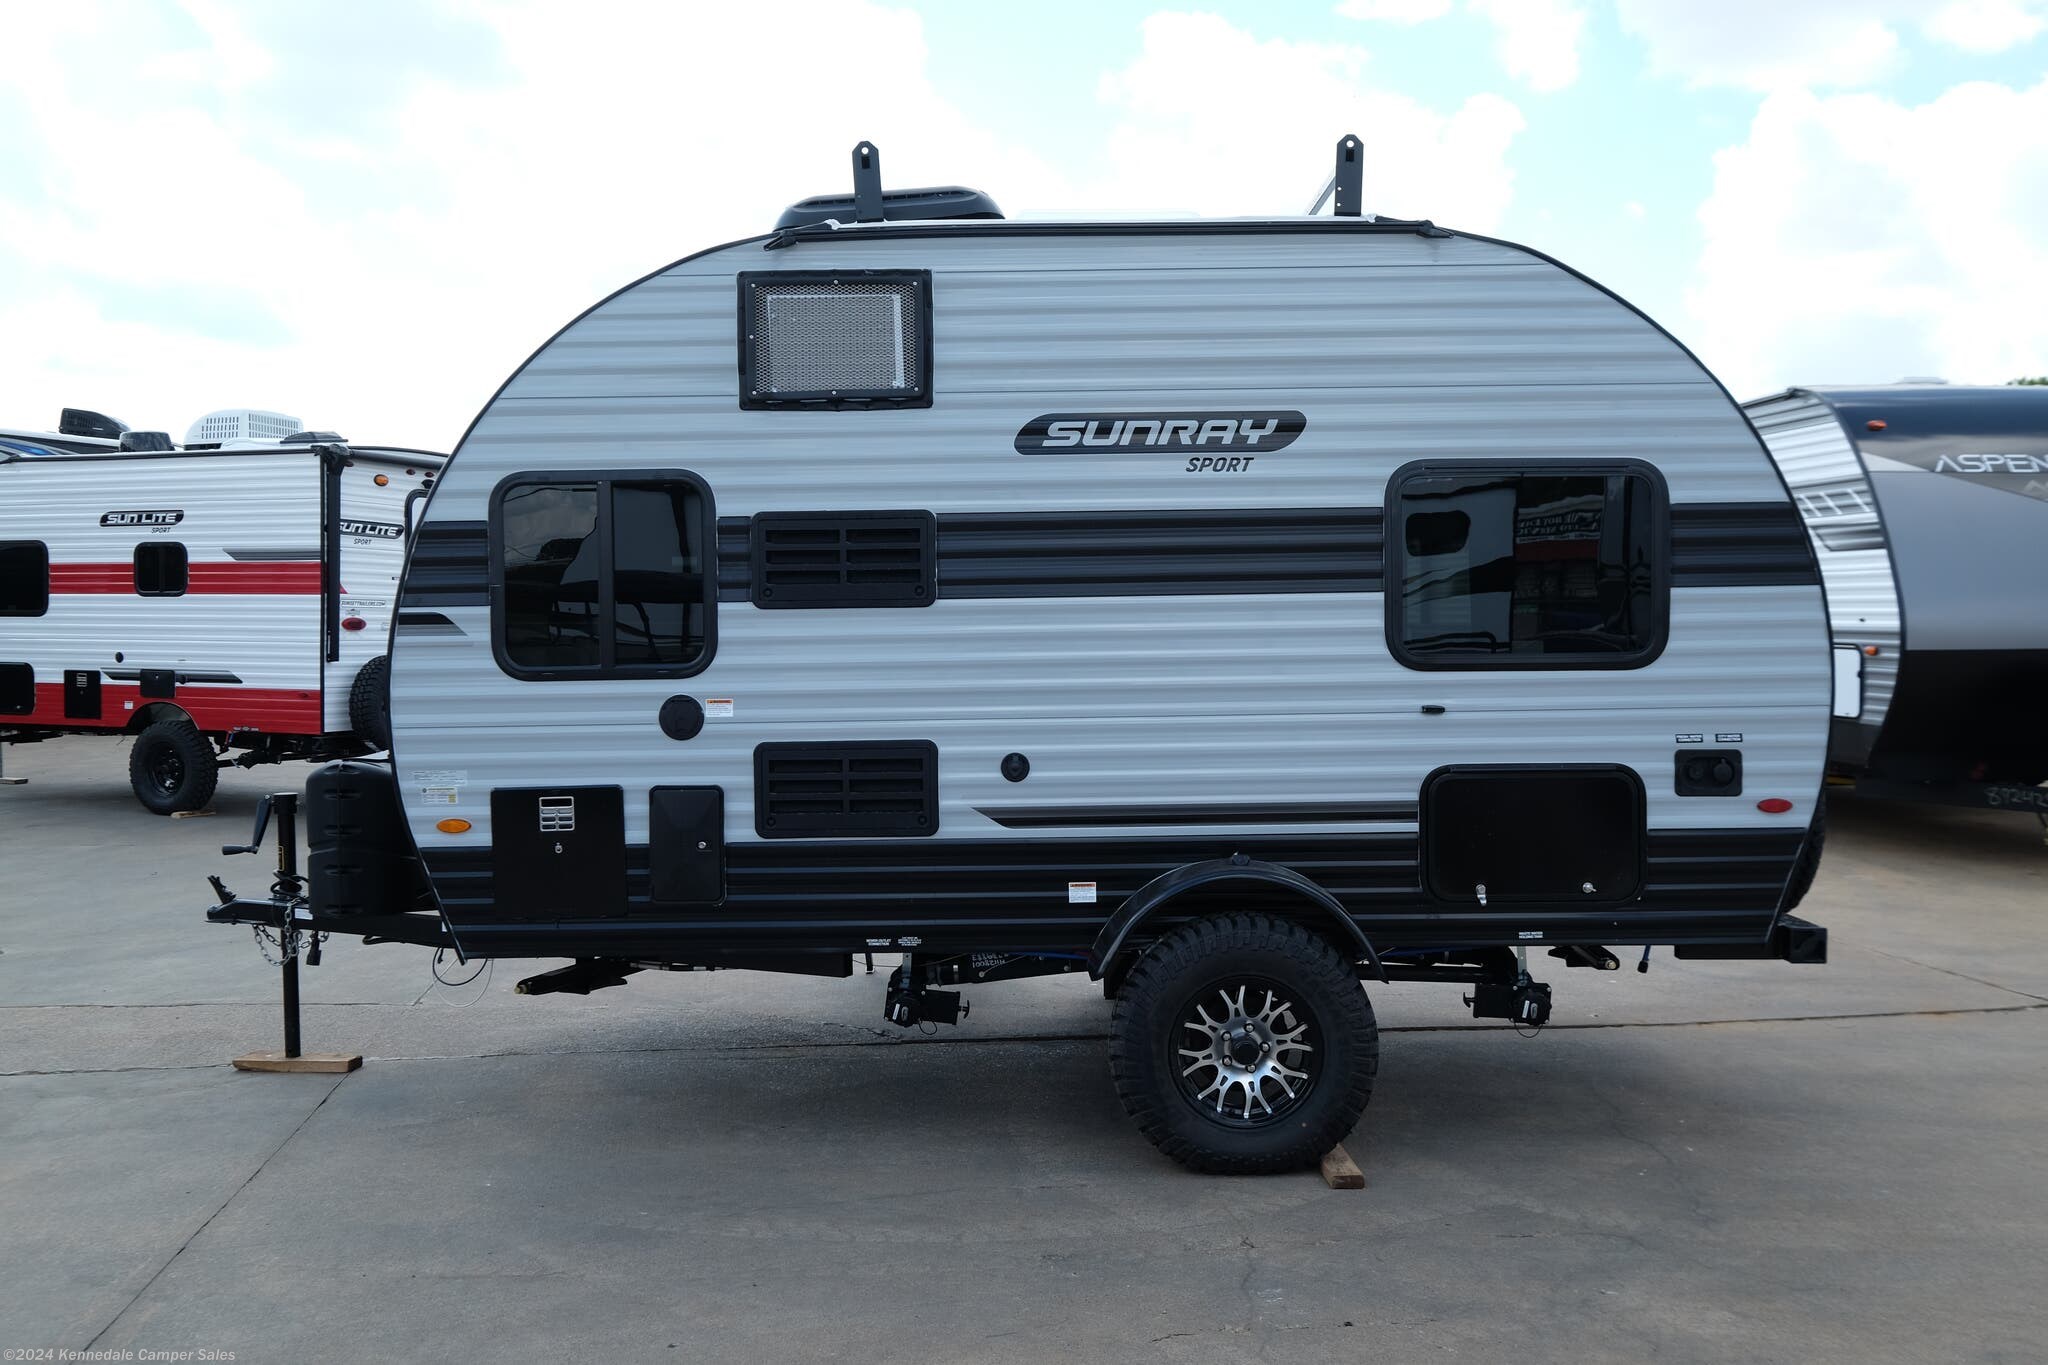 2023 Sunset Park RV SunRay 149 RV for Sale in Kennedale, TX 76060